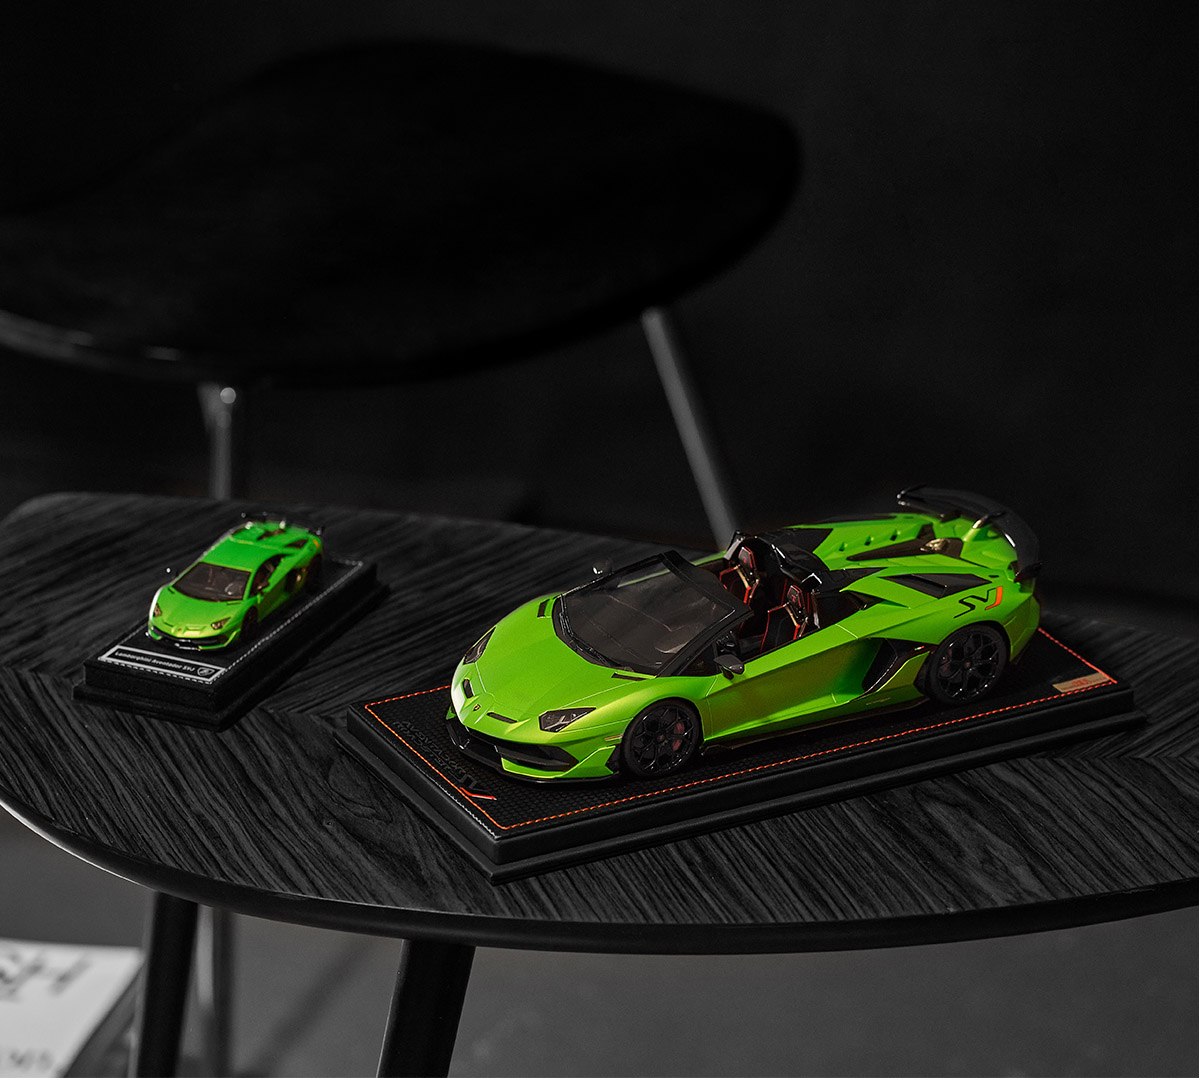 Model cars Collection: Perfection in miniature